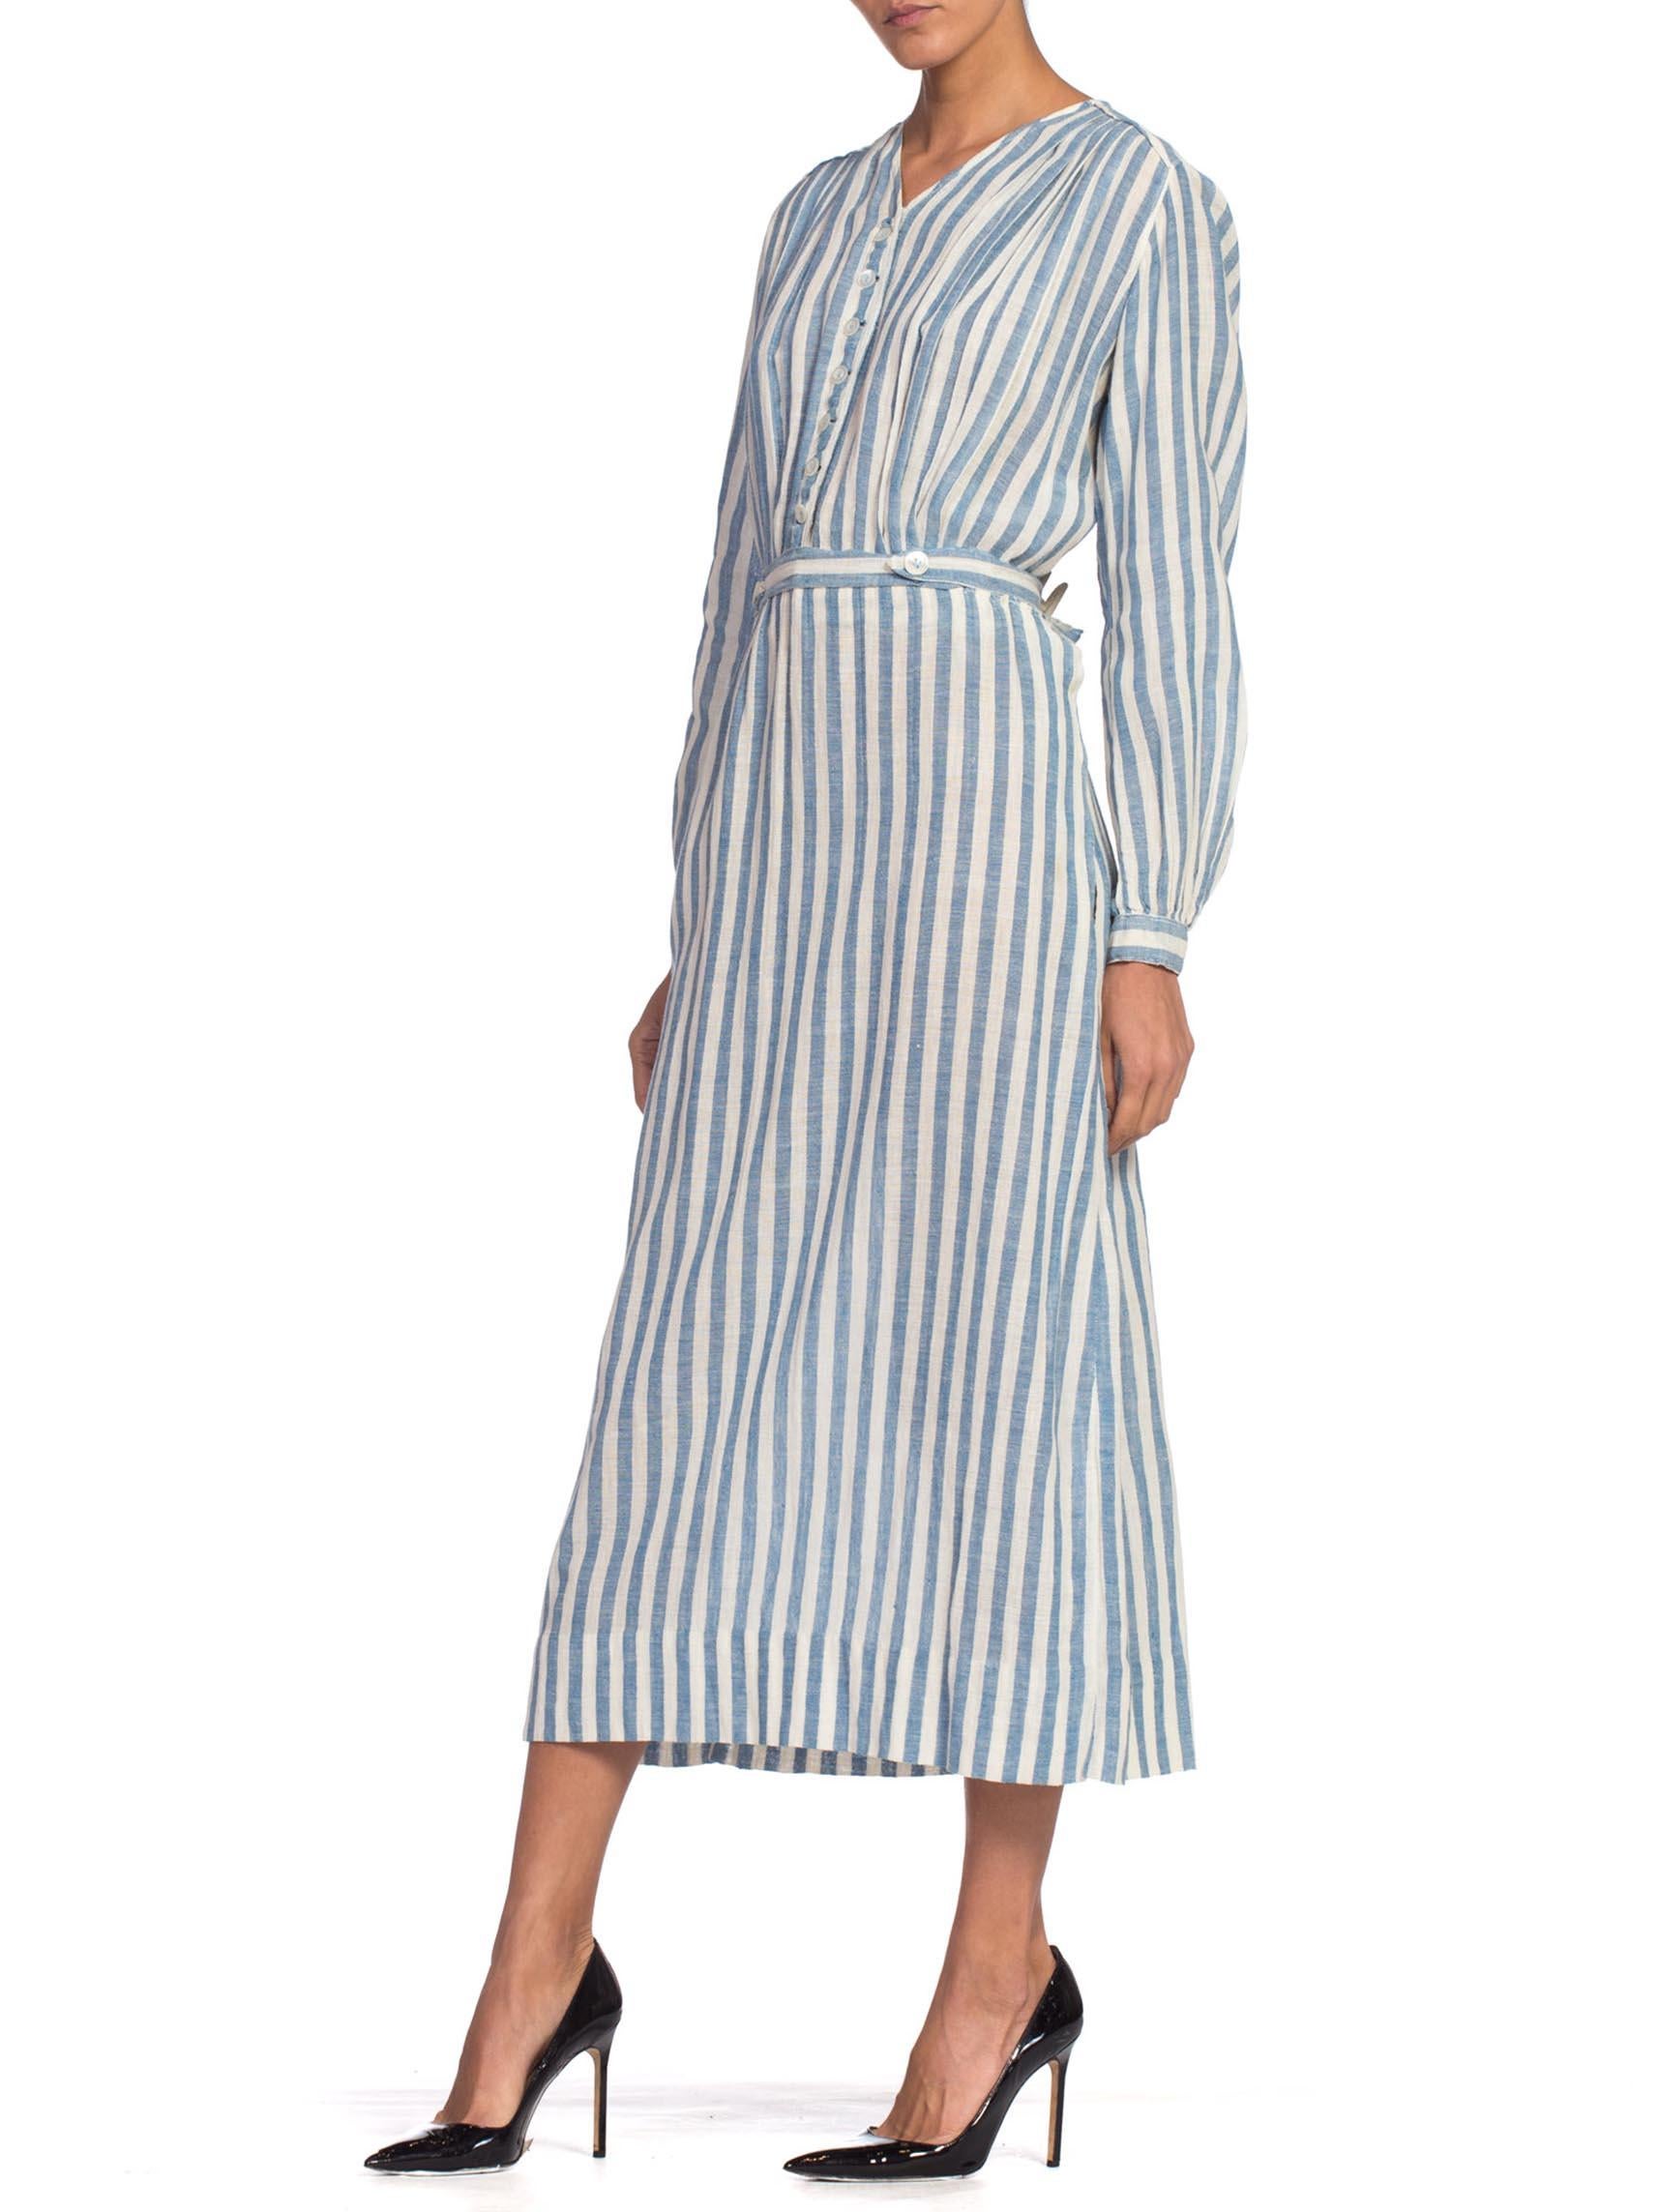 blue and white striped dress long sleeve